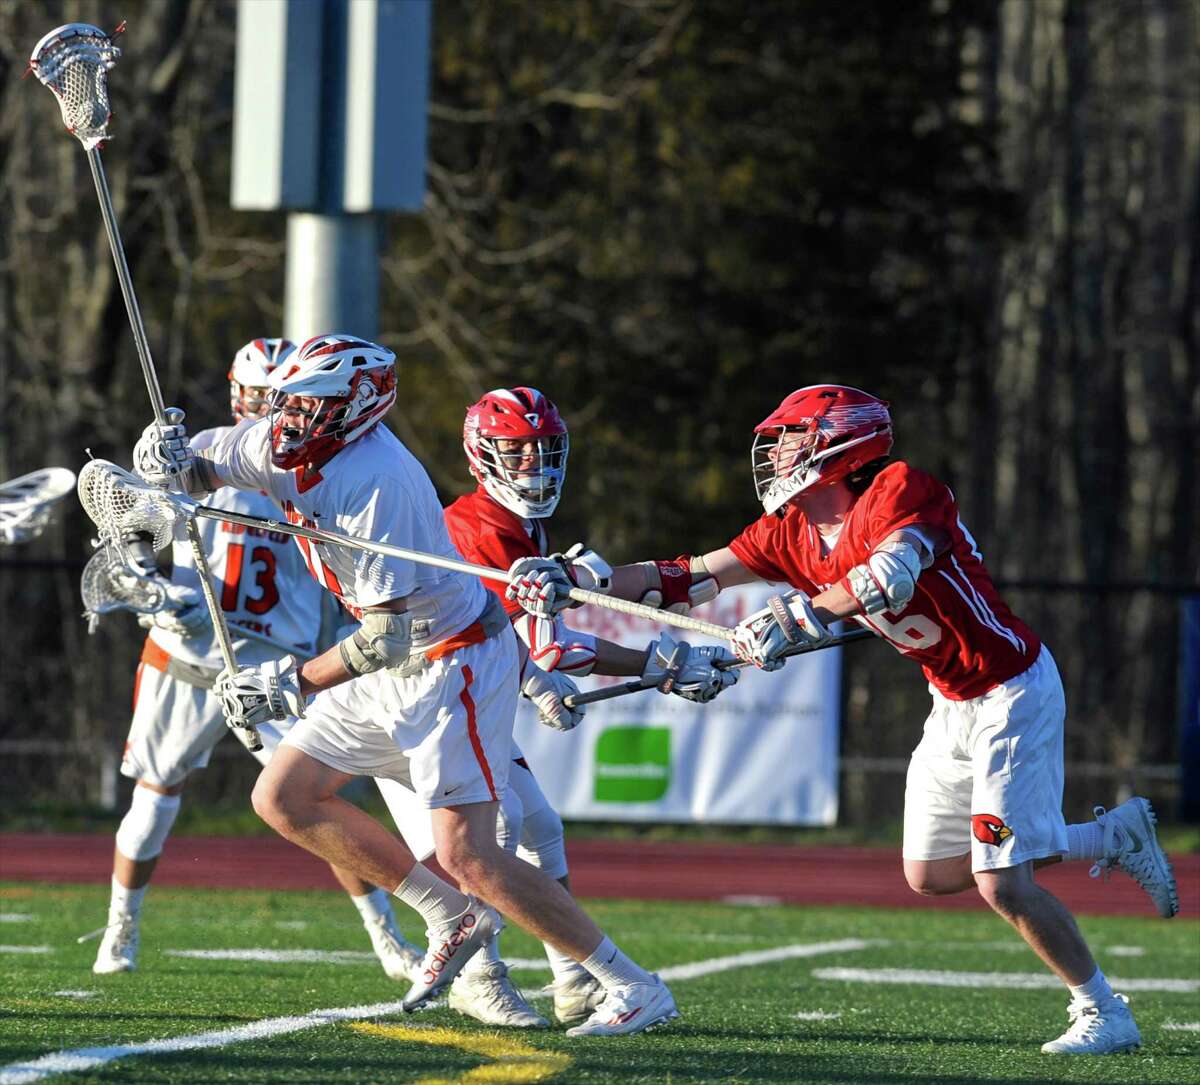 Ridgefield's Chase Levesque (11) moves in to score a goal while being defended by Greenwich's Daniel Colligan (26) in boys lacrosse game between Greenwich and Ridgefield high schools on Tuesday, April 12, 2016, at Ridgefield High School, in Ridgefield, Conn.